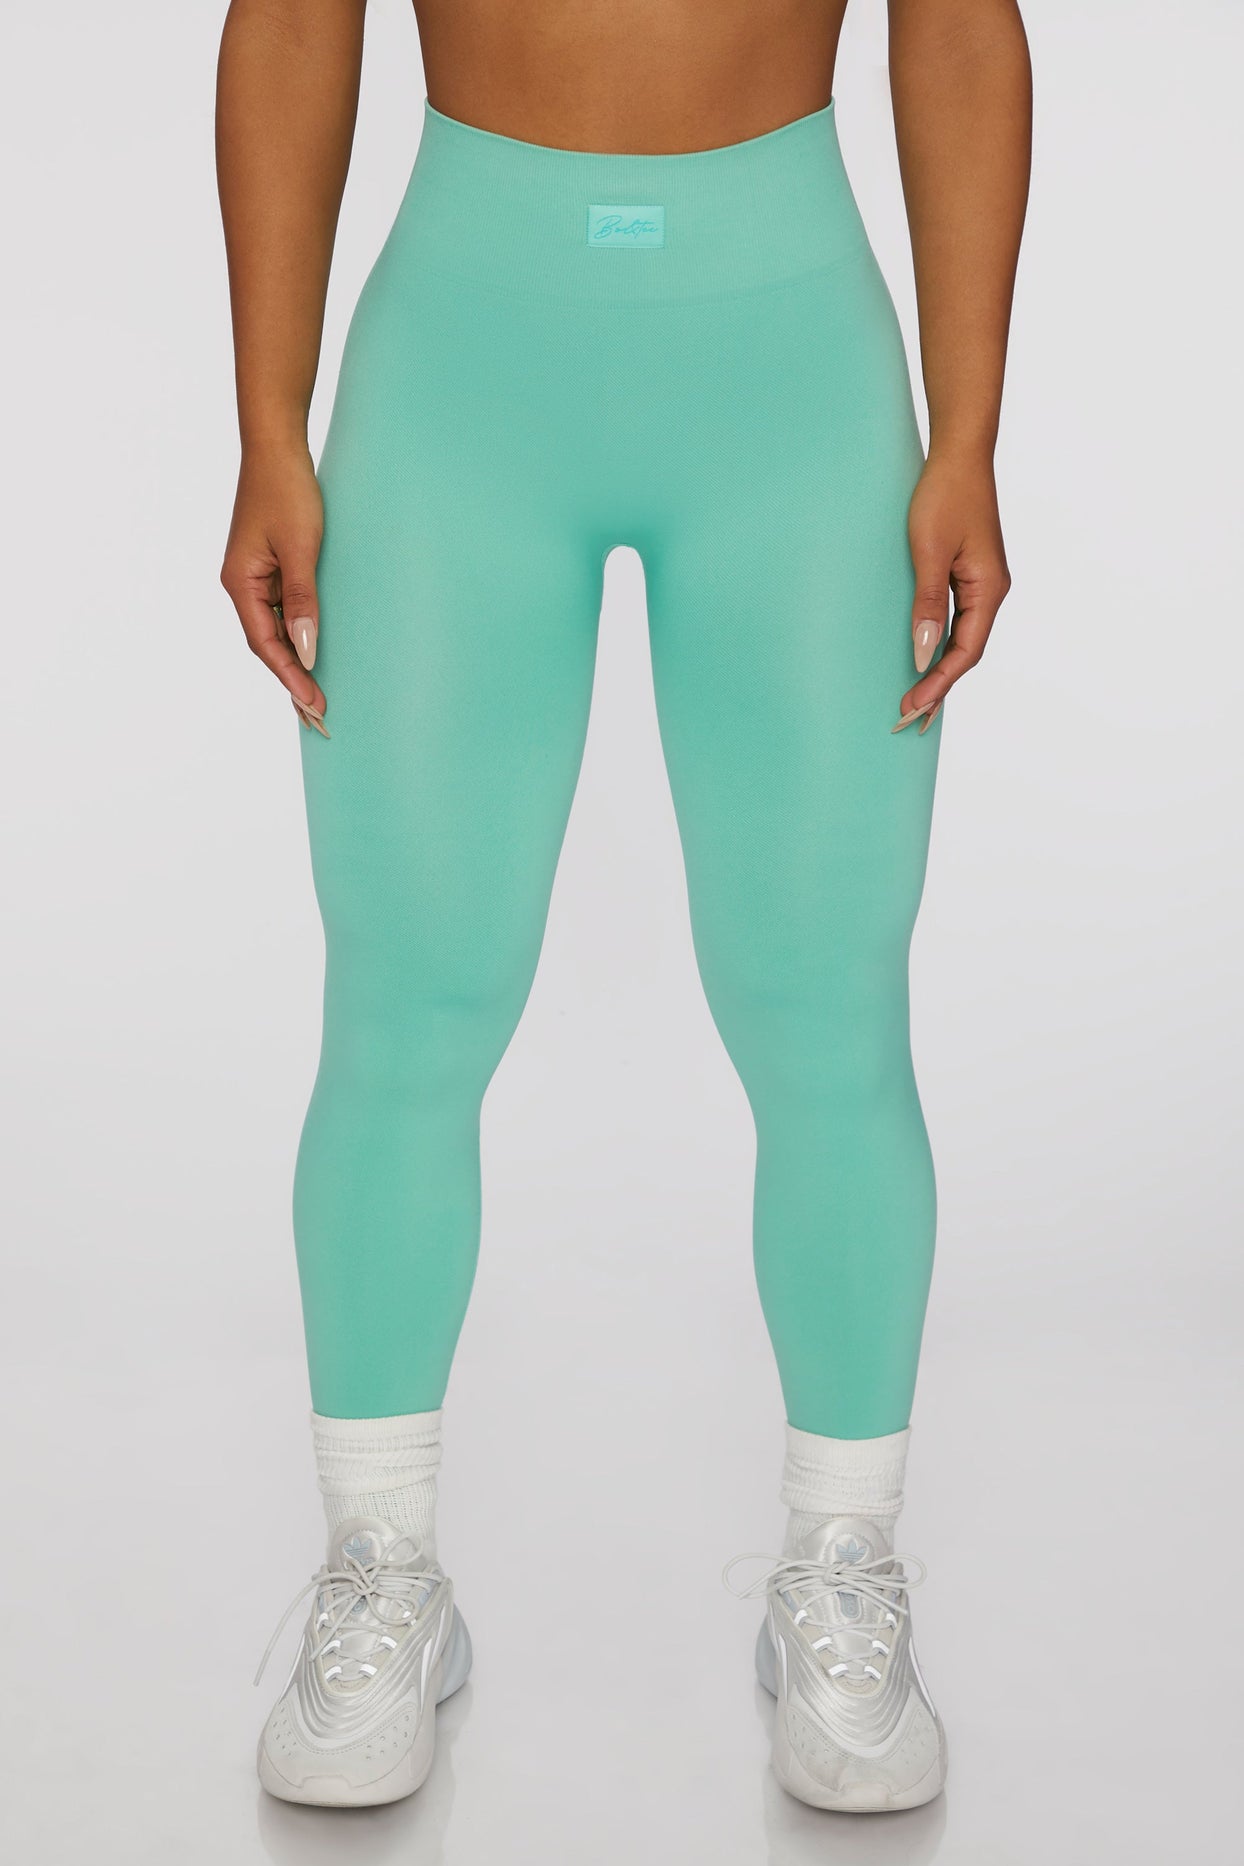 Energetic Seamless High Waisted Leggings in Turquoise